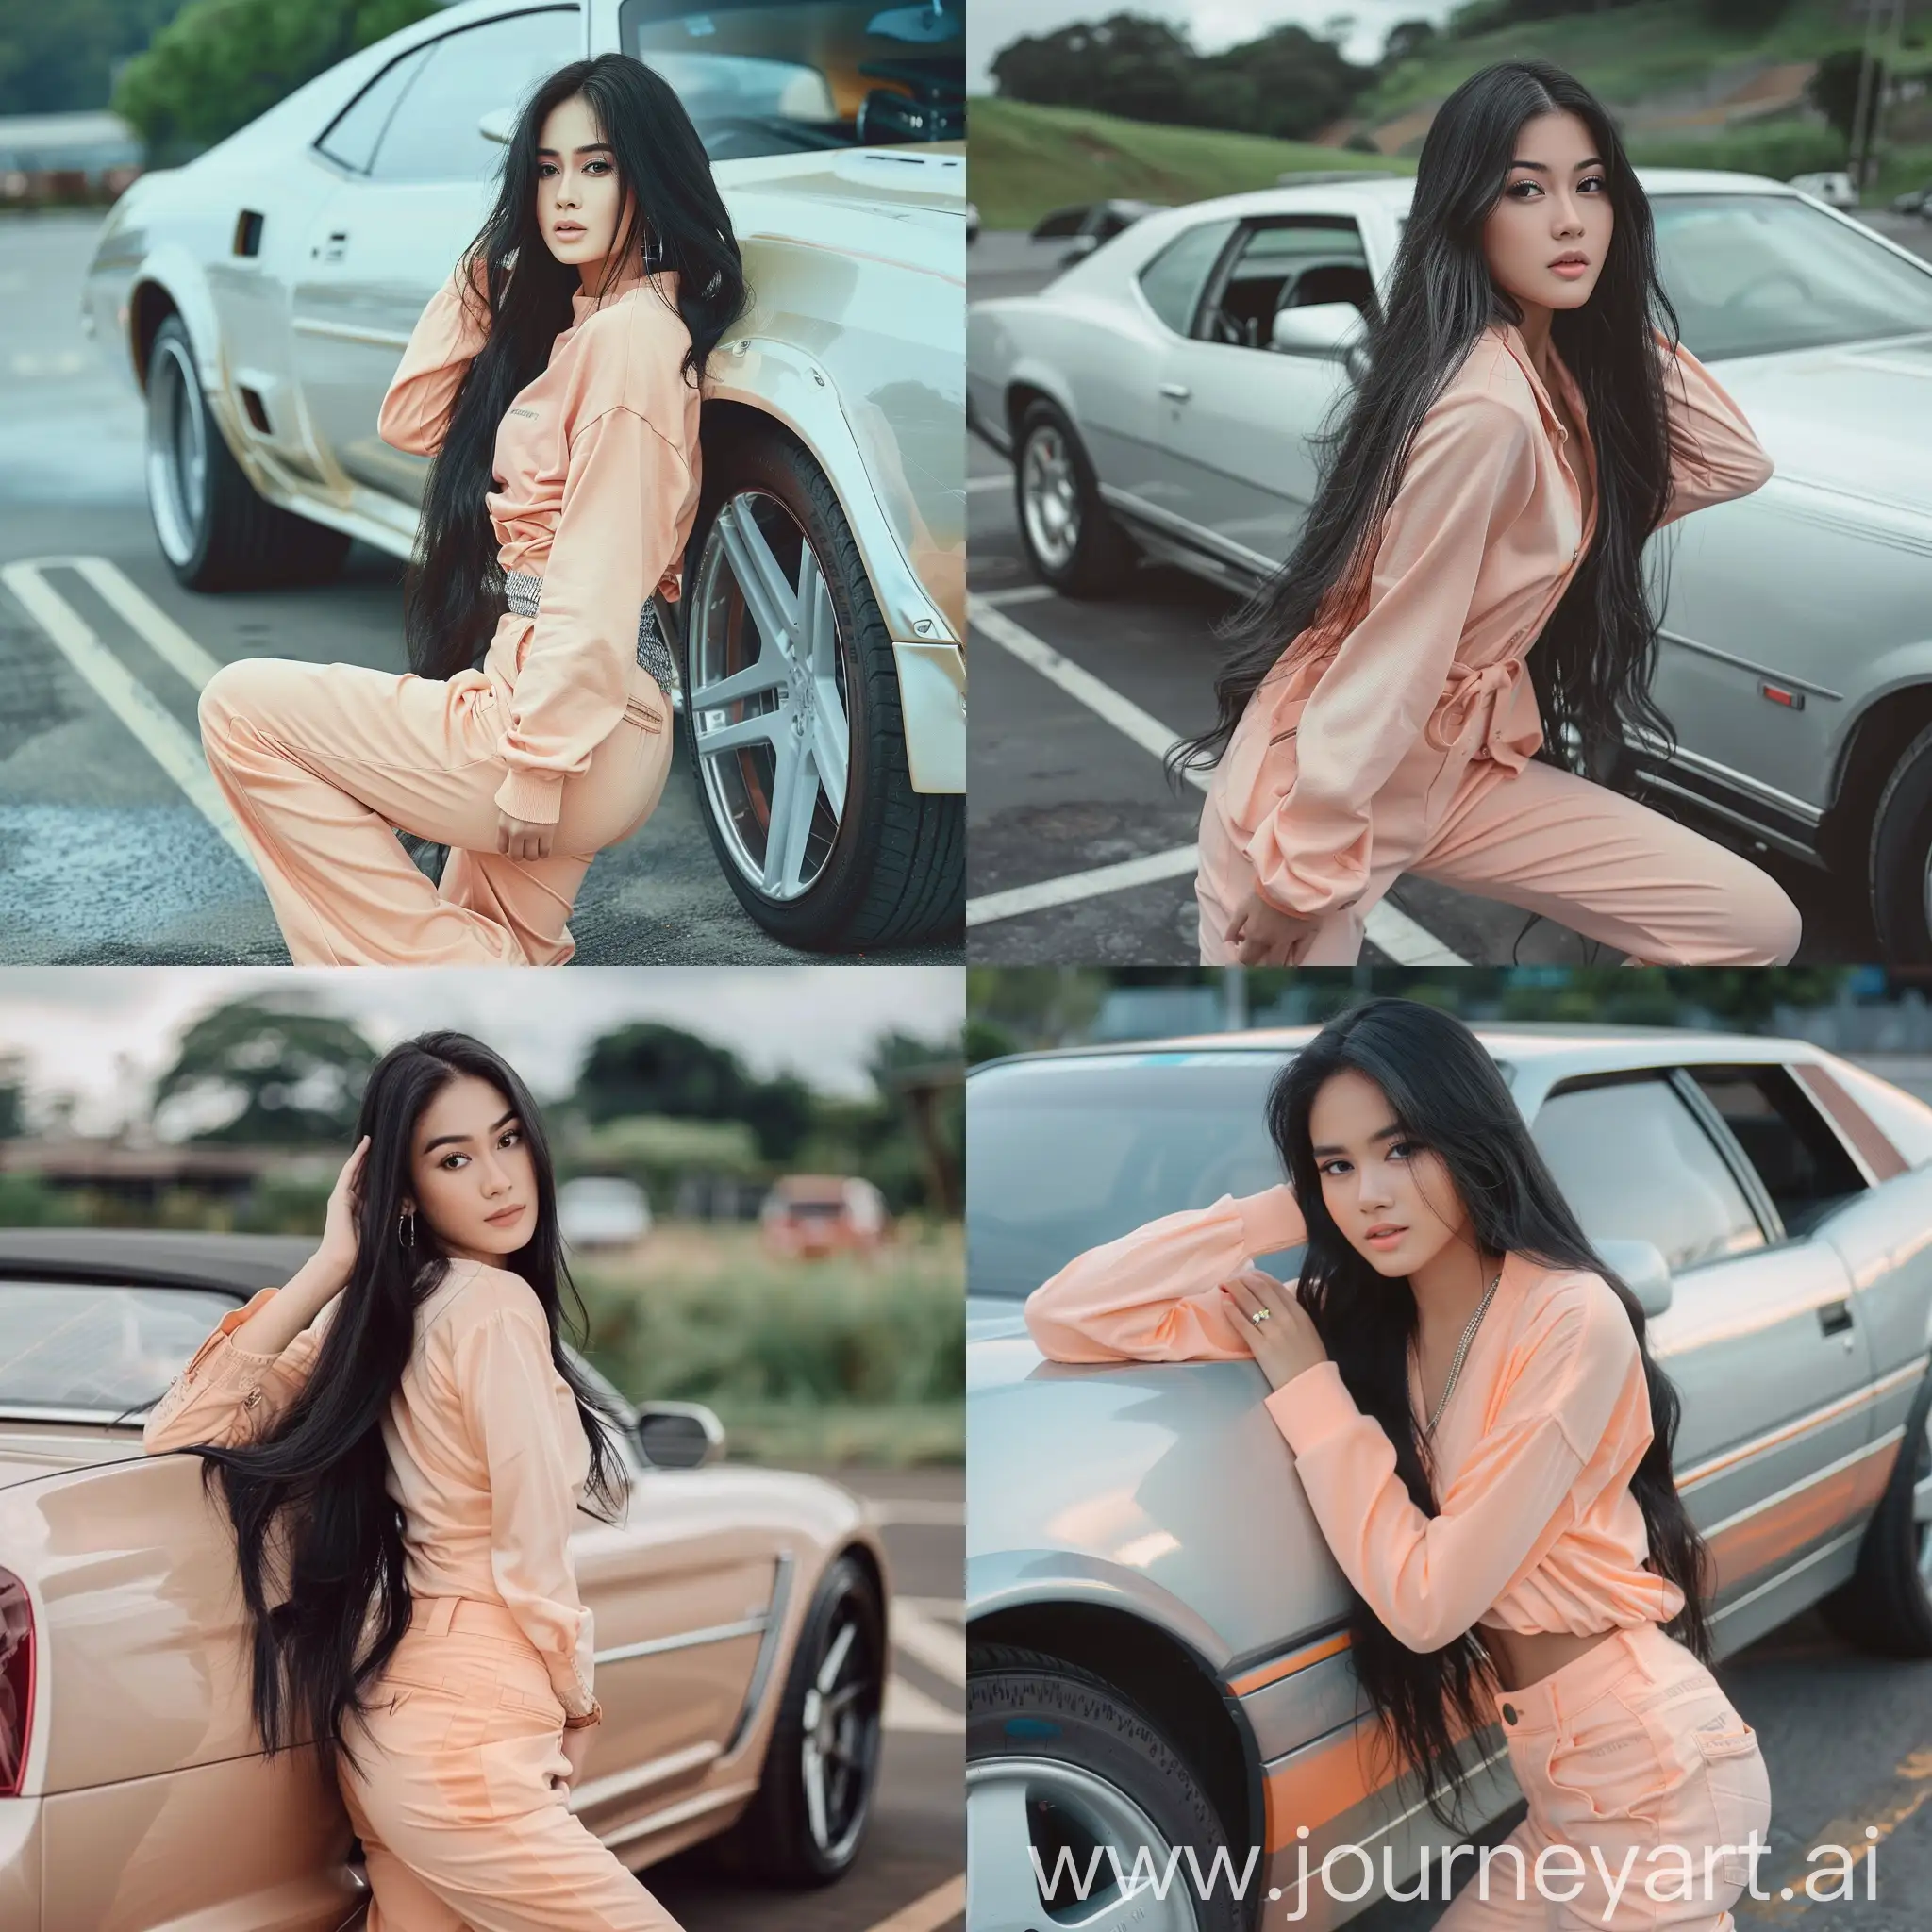 Elegant-Indonesian-Woman-Leaning-on-Expensive-Car-in-Parking-Lot